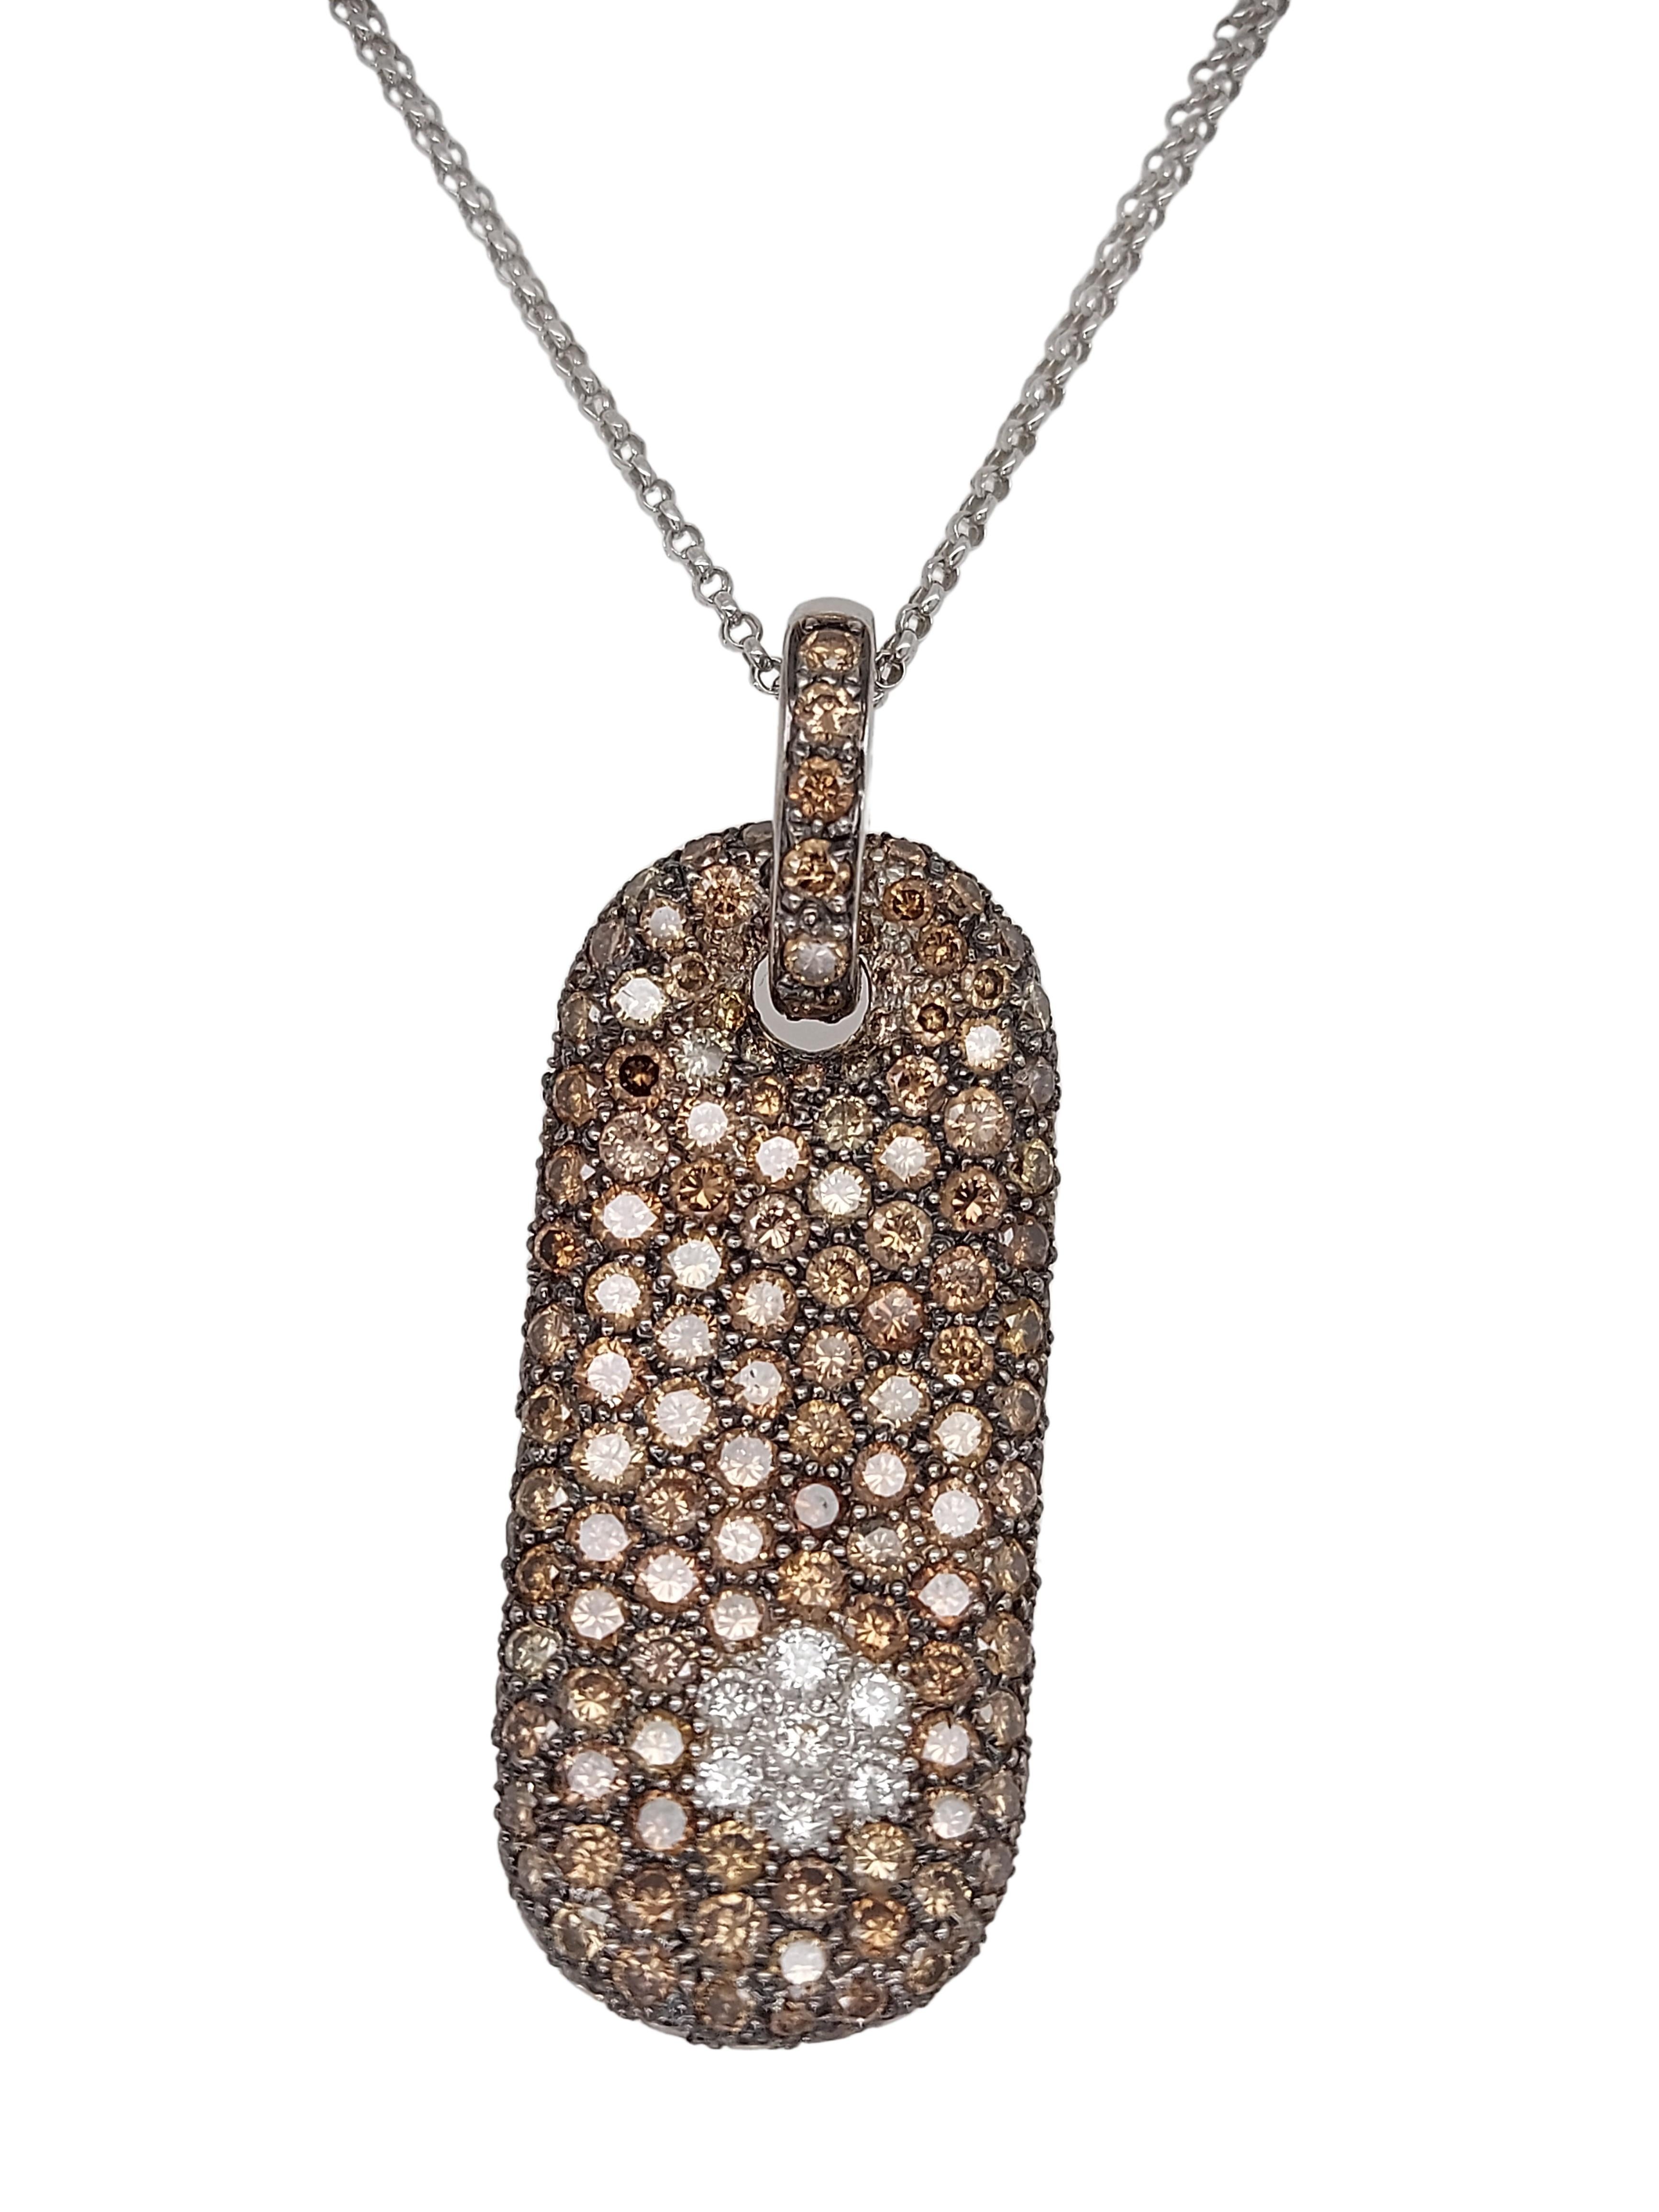 Artisan 18kt White Gold Pendant, Necklace with 0.28ct White & 6ct Brown Diamonds For Sale